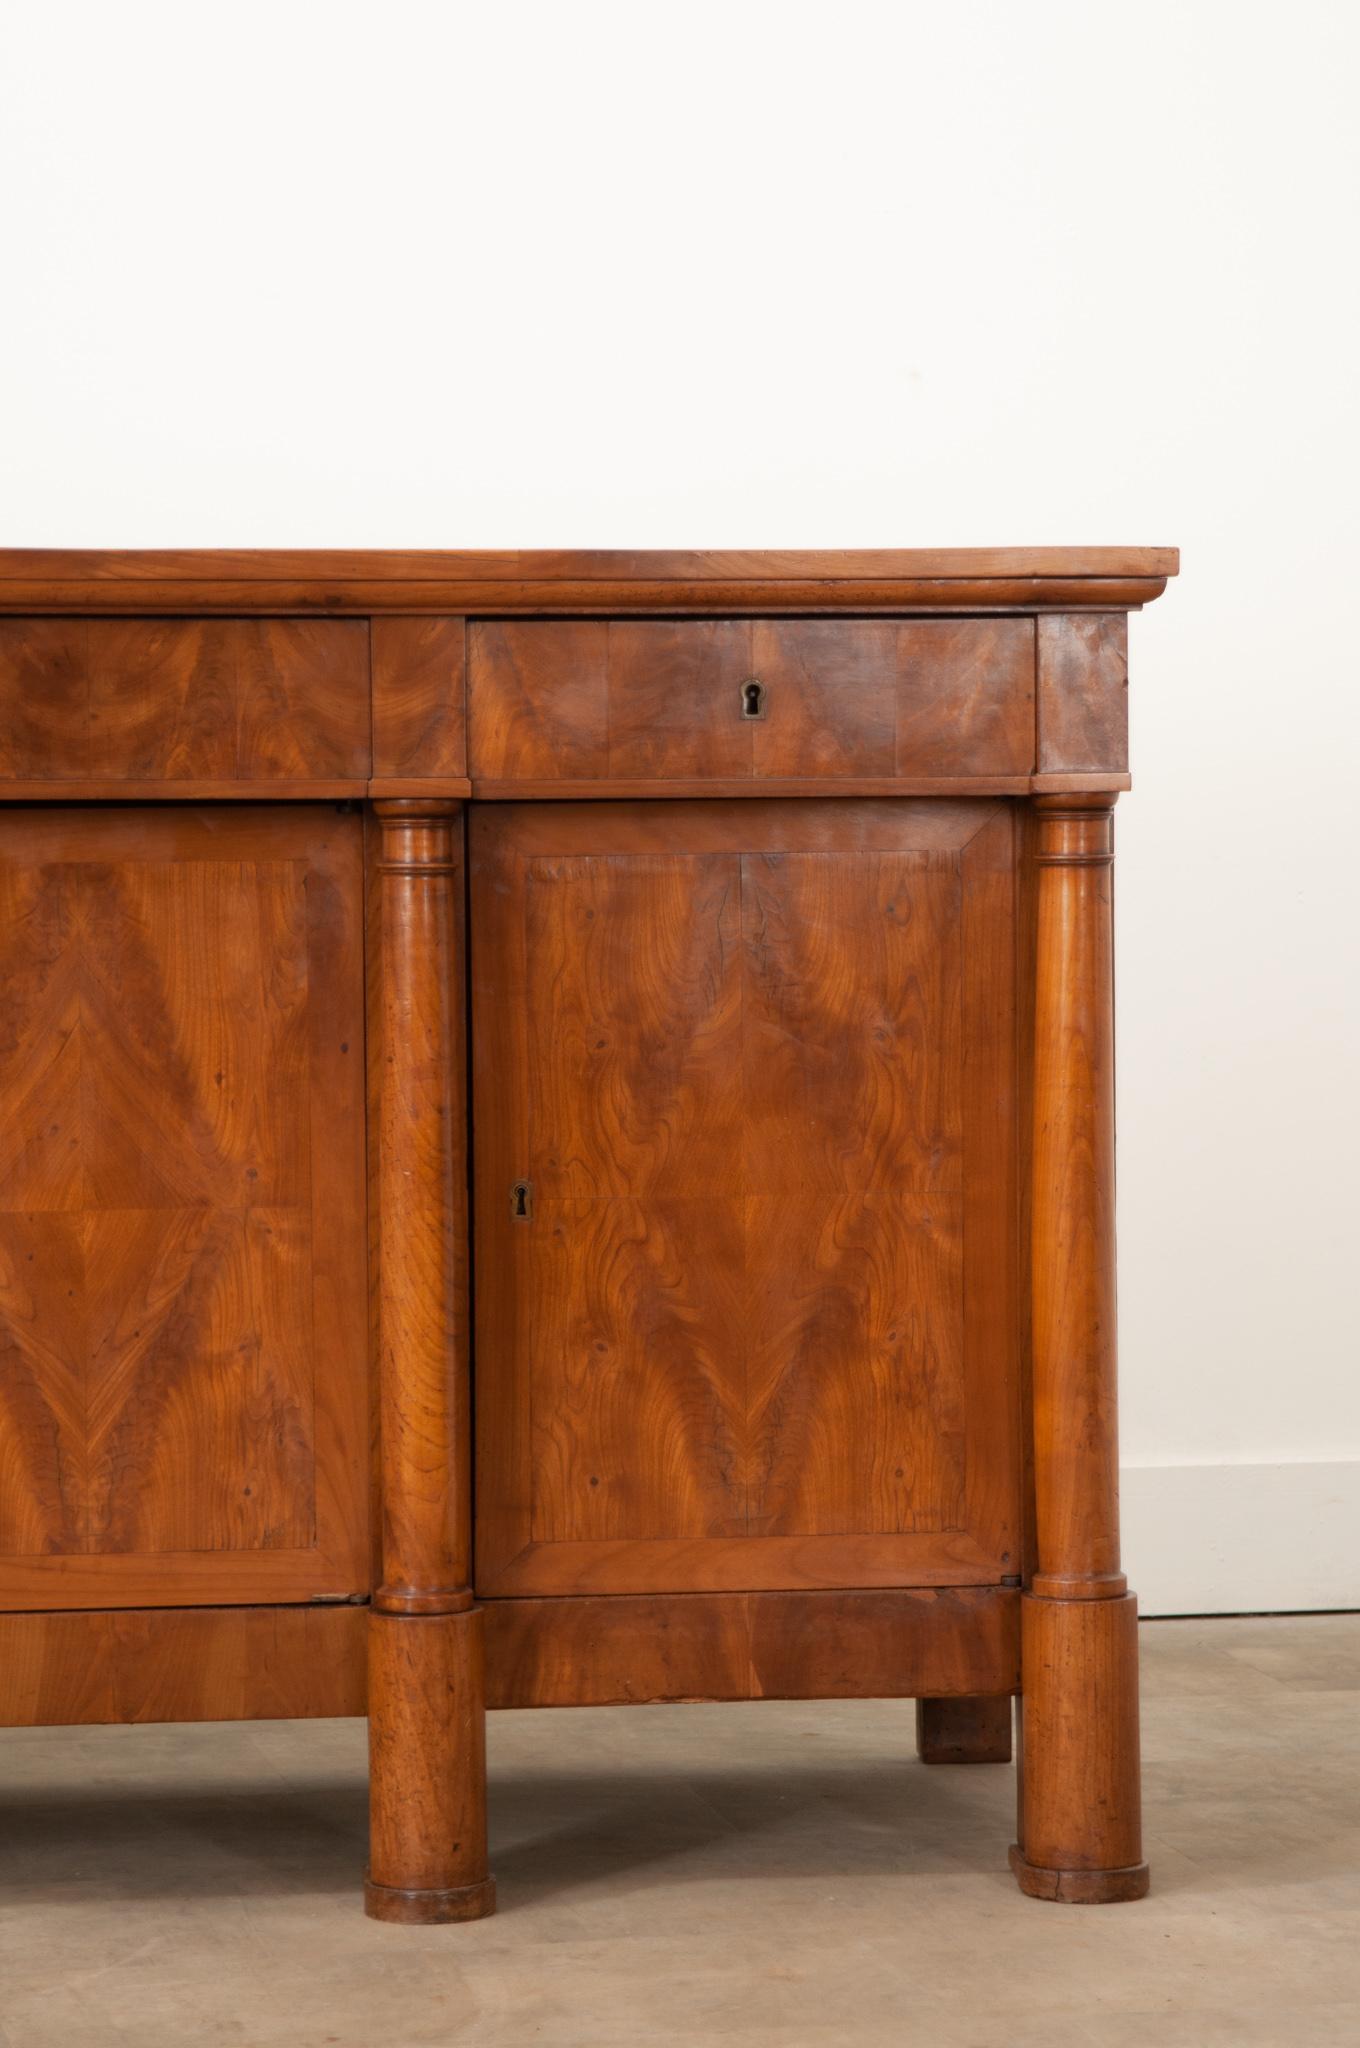 Dazzling bookmatched veneer and figured fruitwood make this 19th century French Empire style enfilade truly stunning. Hand-crafted in France circa 1850, this enfilade features a gorgeous, smooth, well patinated top with a deep molded edge which sits